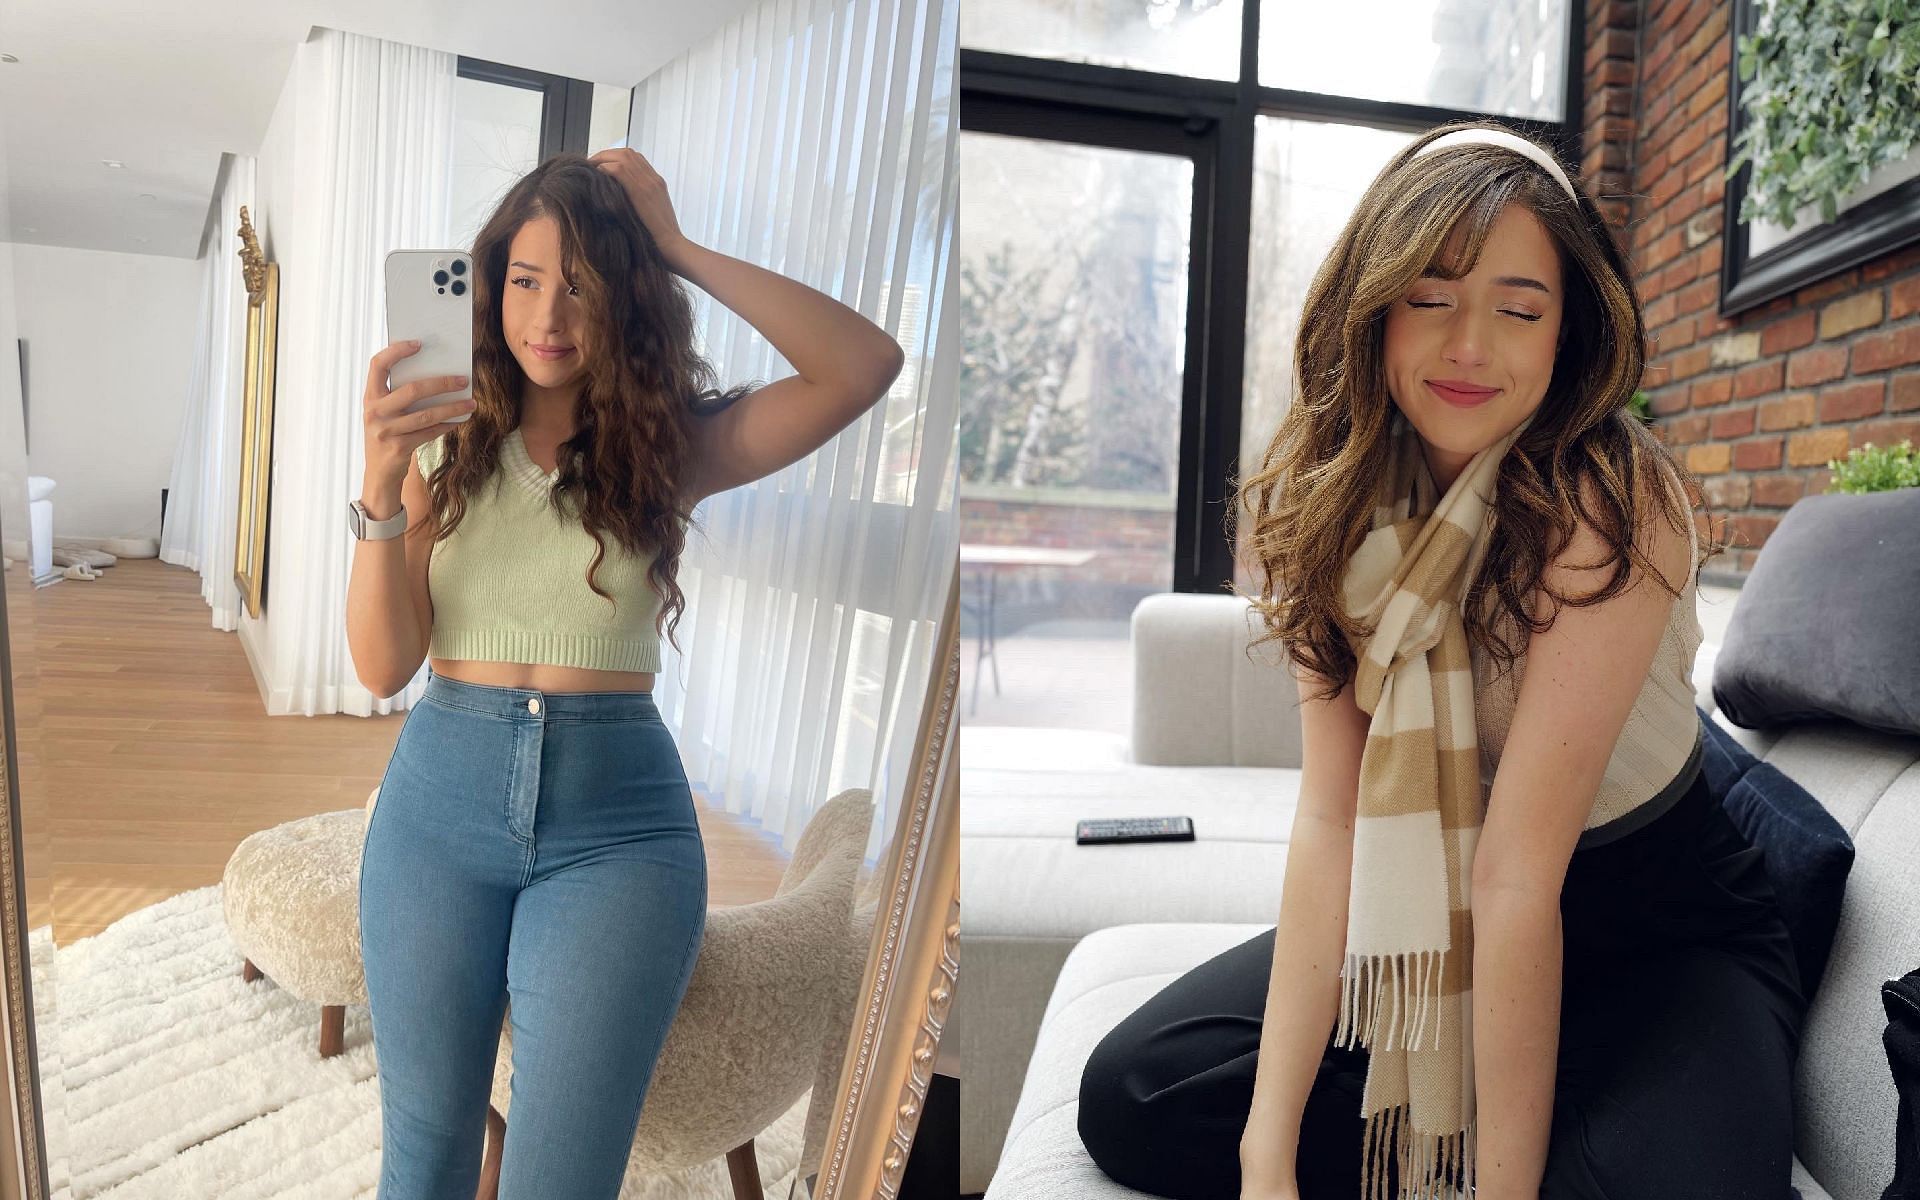 Twitch streamer Imane shares her experience with two strangers who harassed her (Images via Pokimane/Twitter)